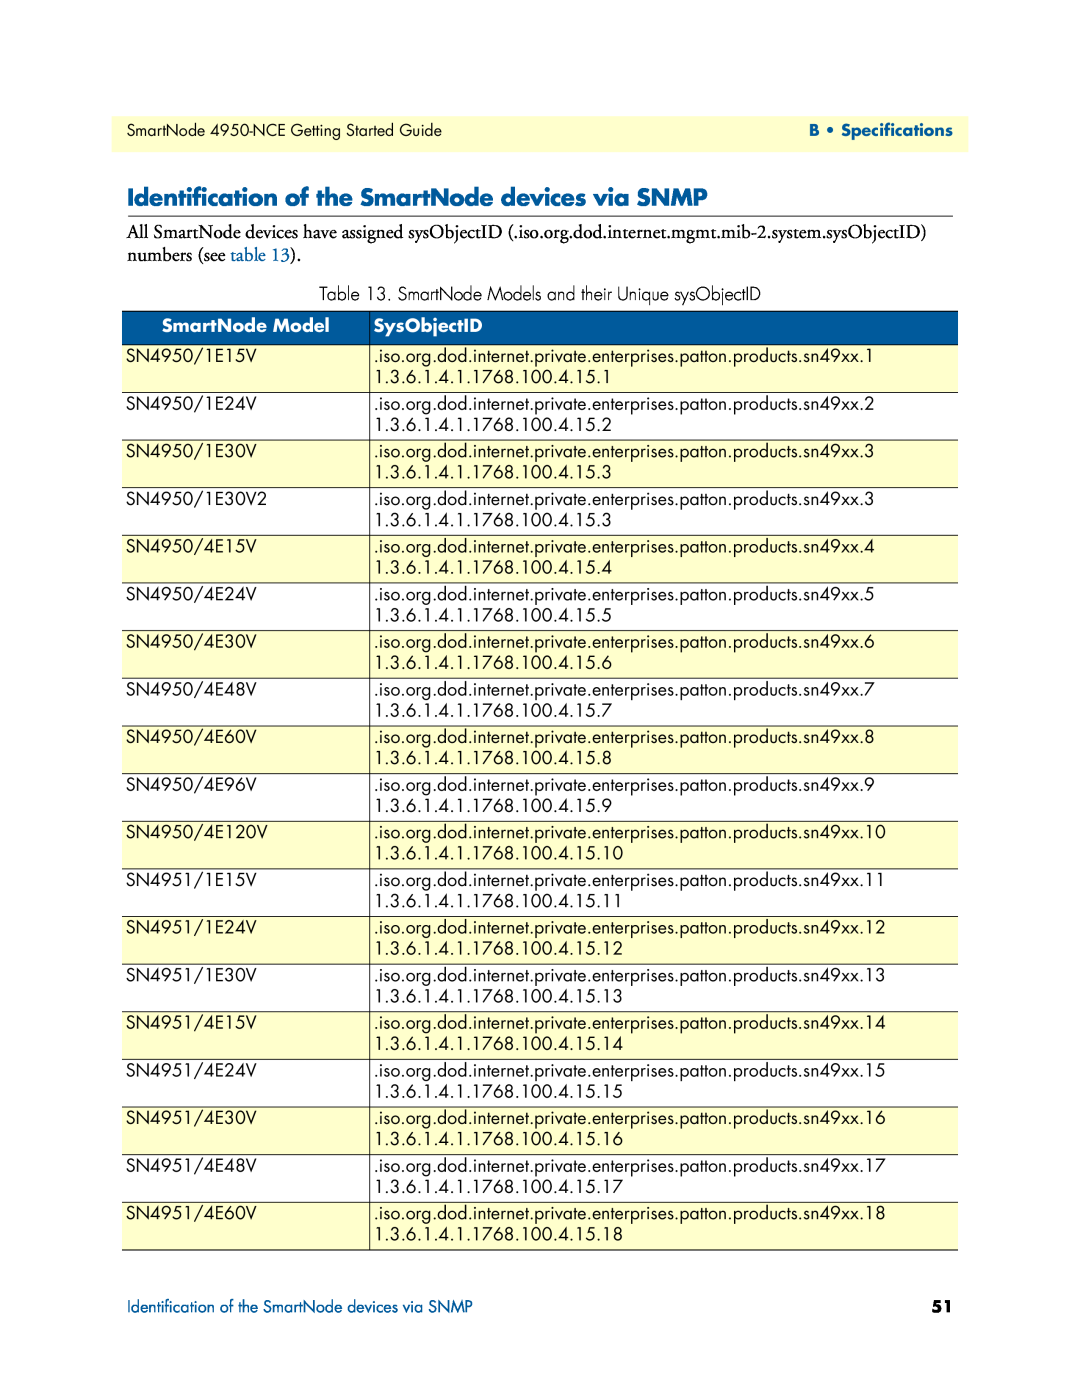 Patton electronic 4950-NCE manual Identification of the SmartNode devices via SNMP, SmartNode Model, SysObjectID 